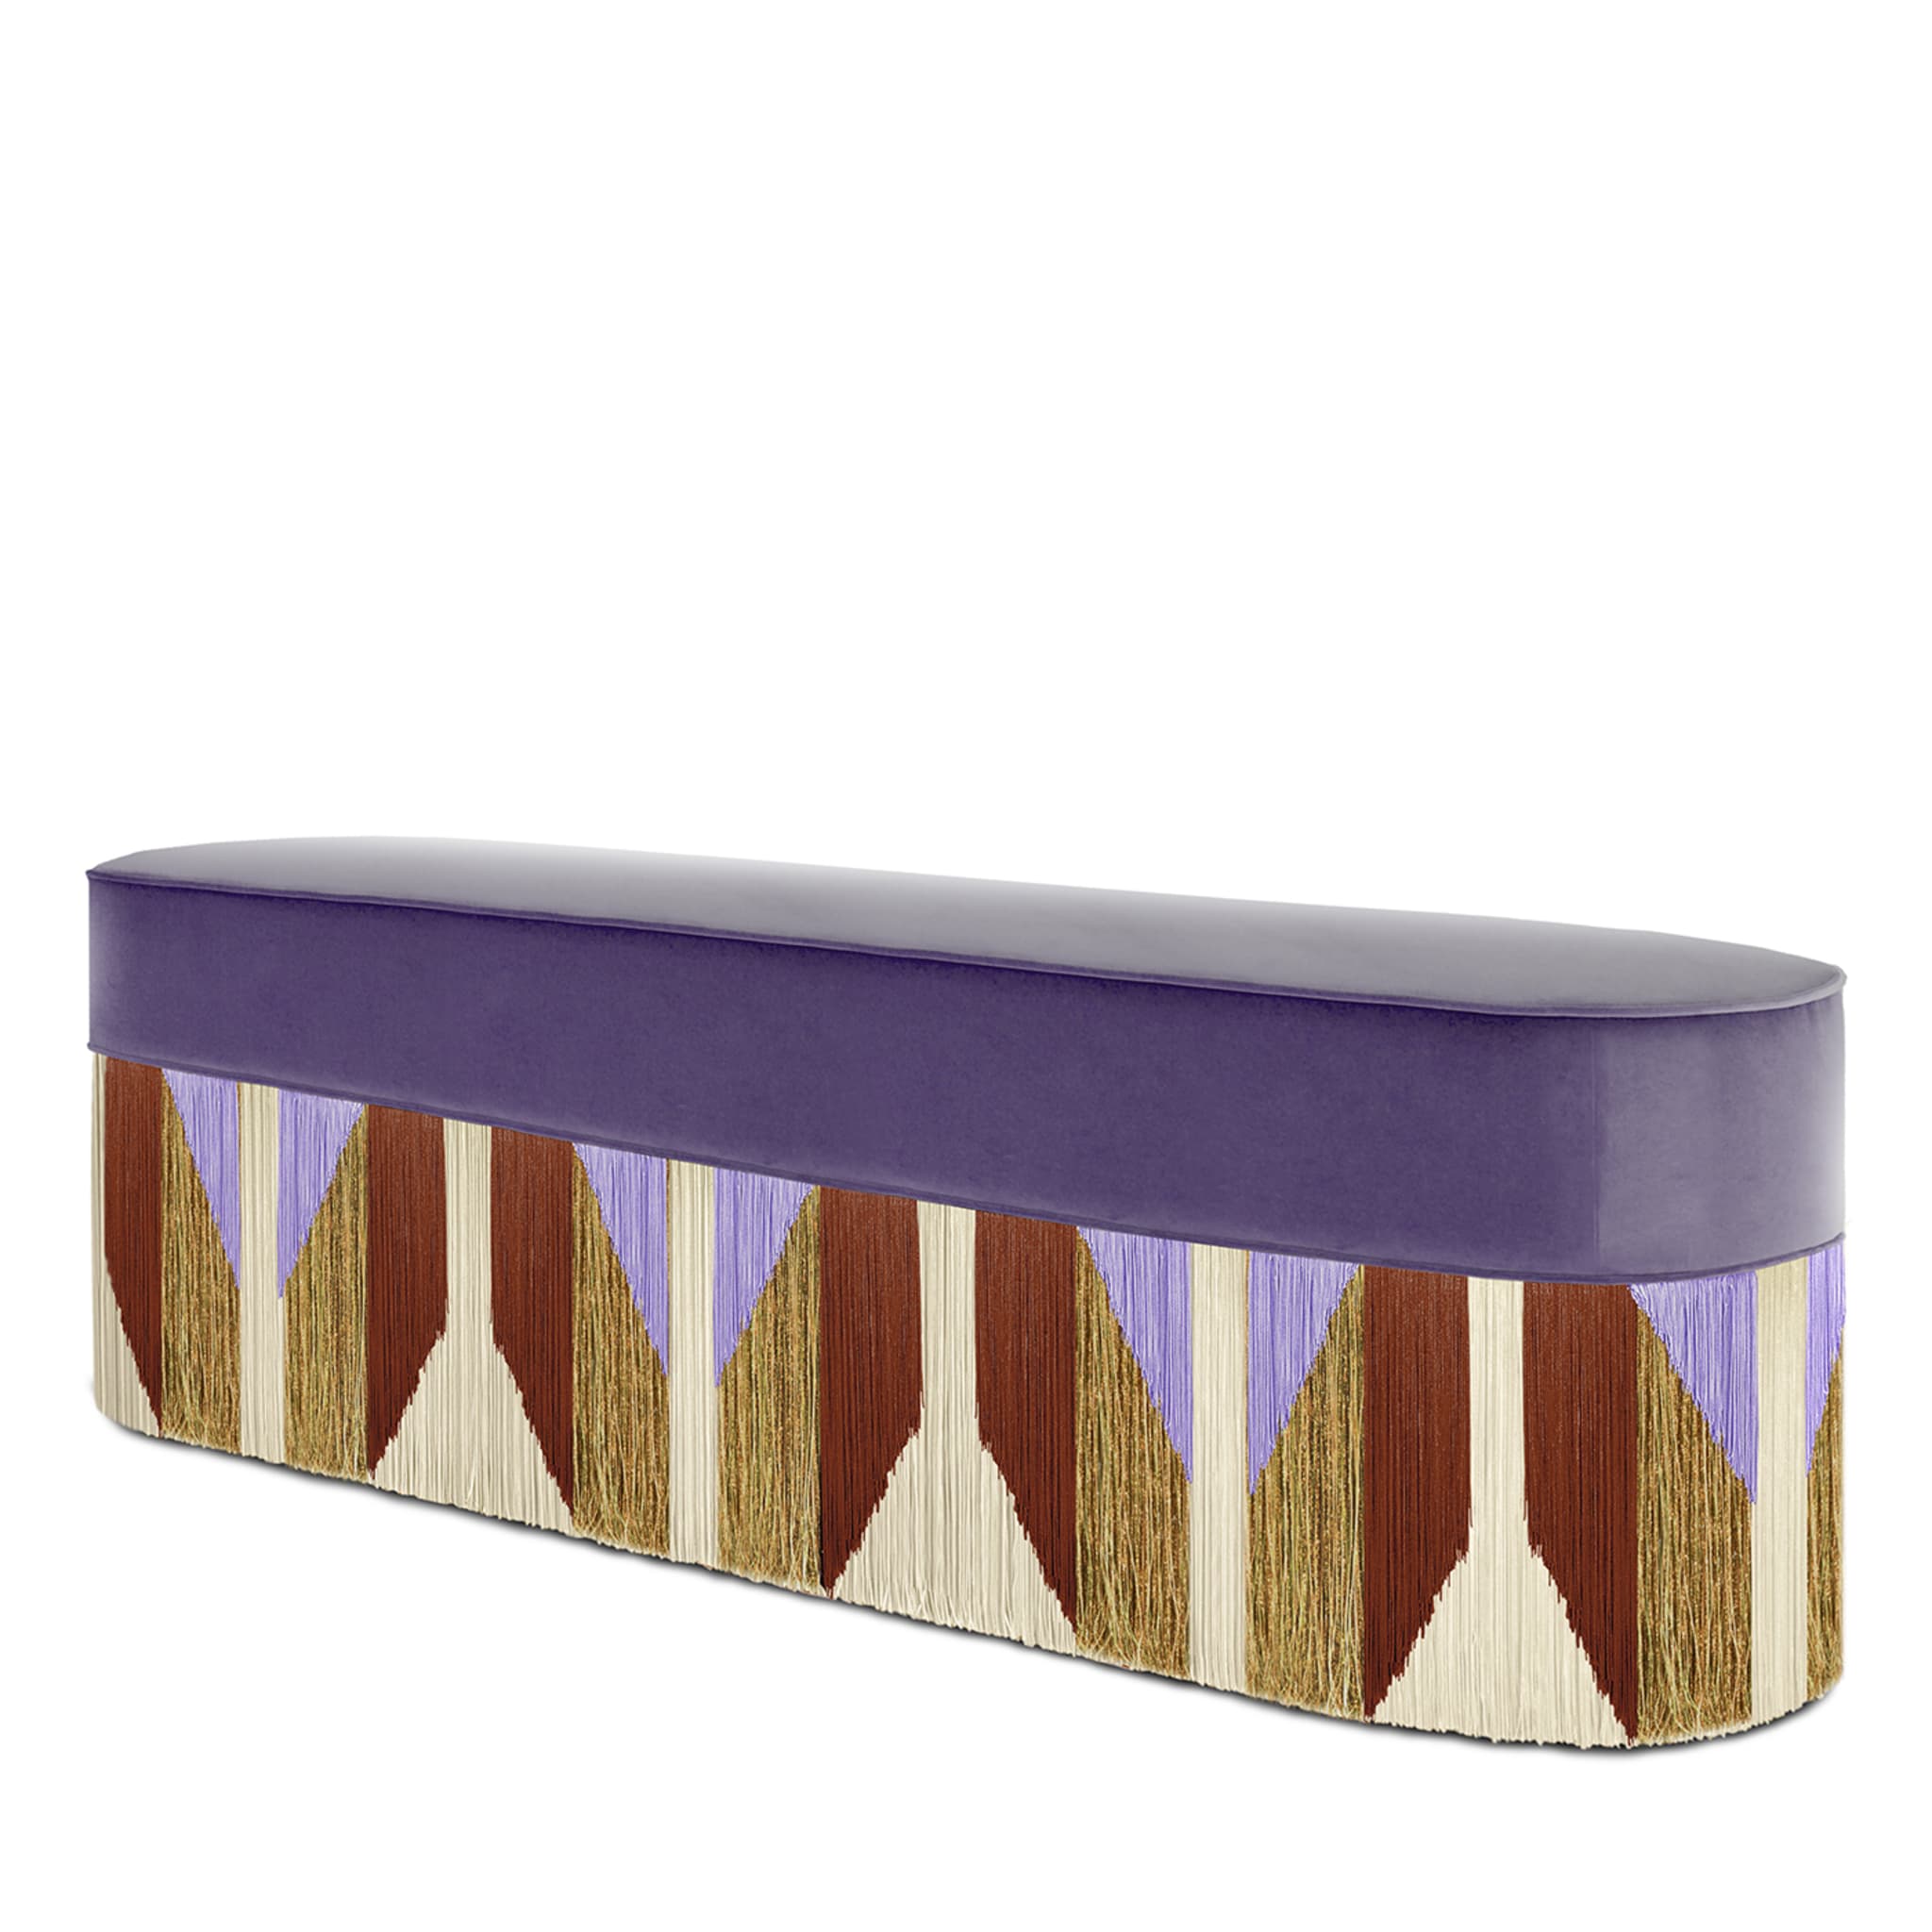 Couture Tribe Polychrome Bench #4 - Alternative view 2